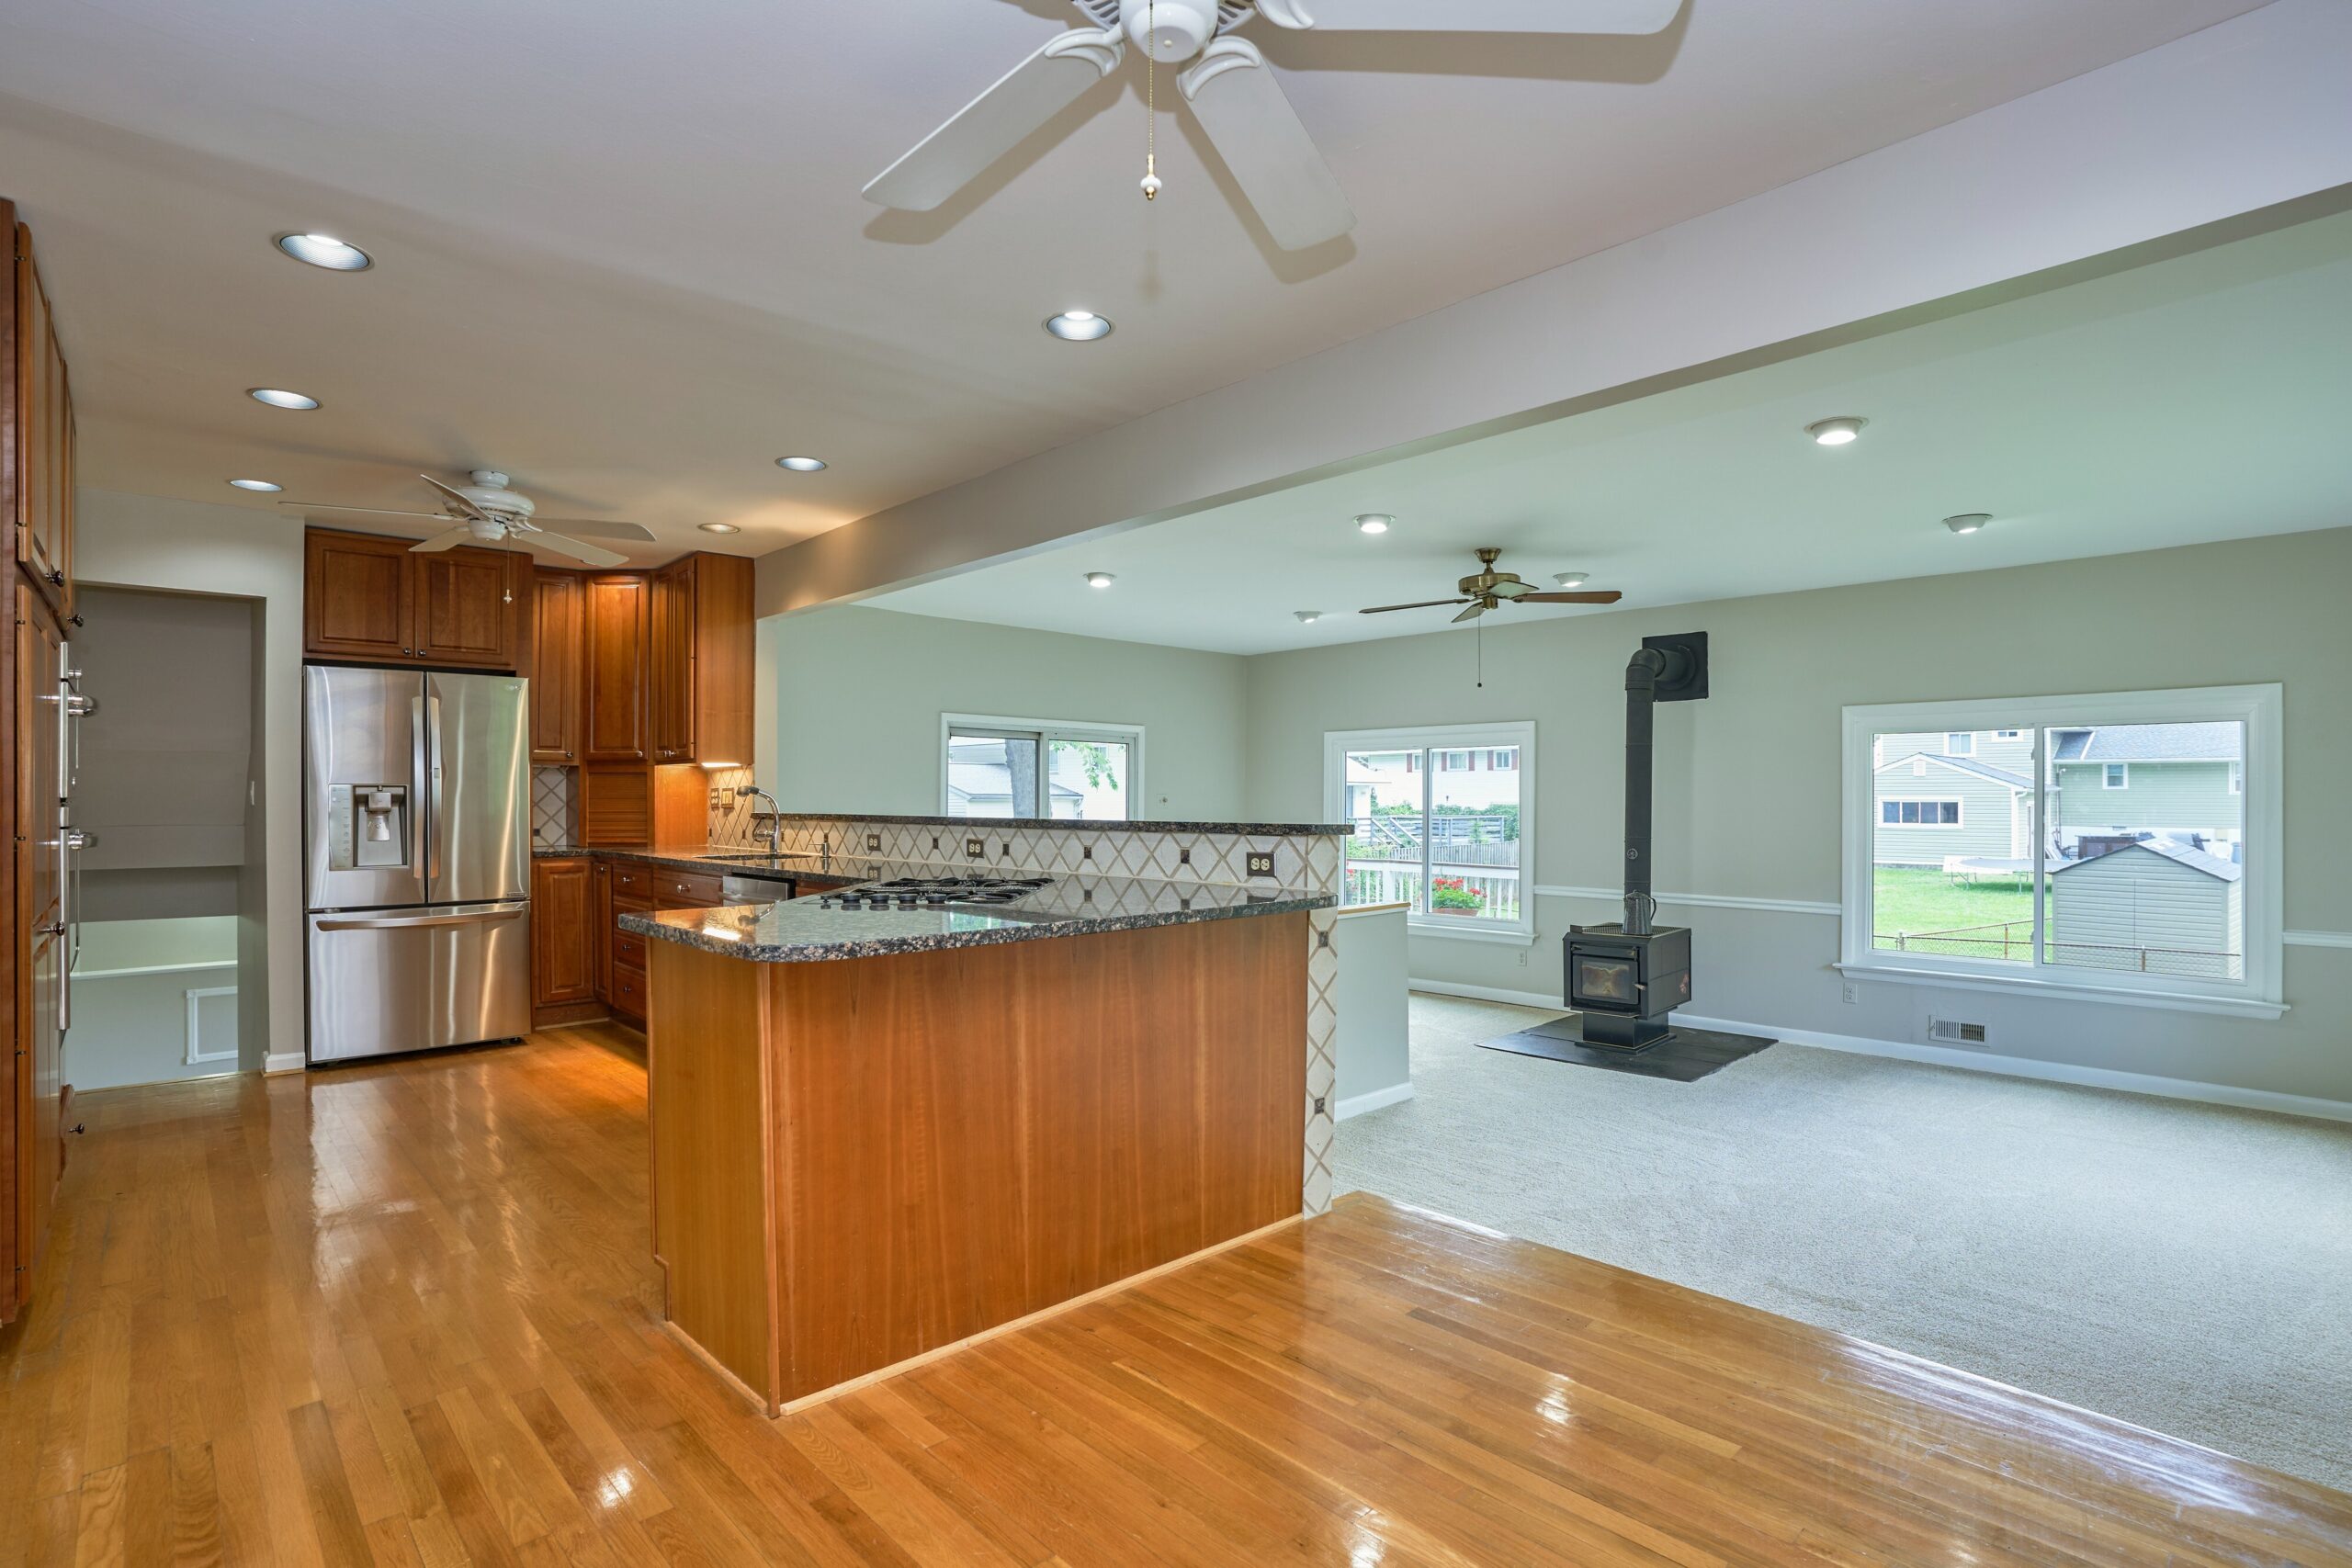 Professional interior photo of 5803 Sable Drive, Alexandria, VA - showing the recessed living room which is a 2 steps down from the kitchen with cherry cabinets in the foreground